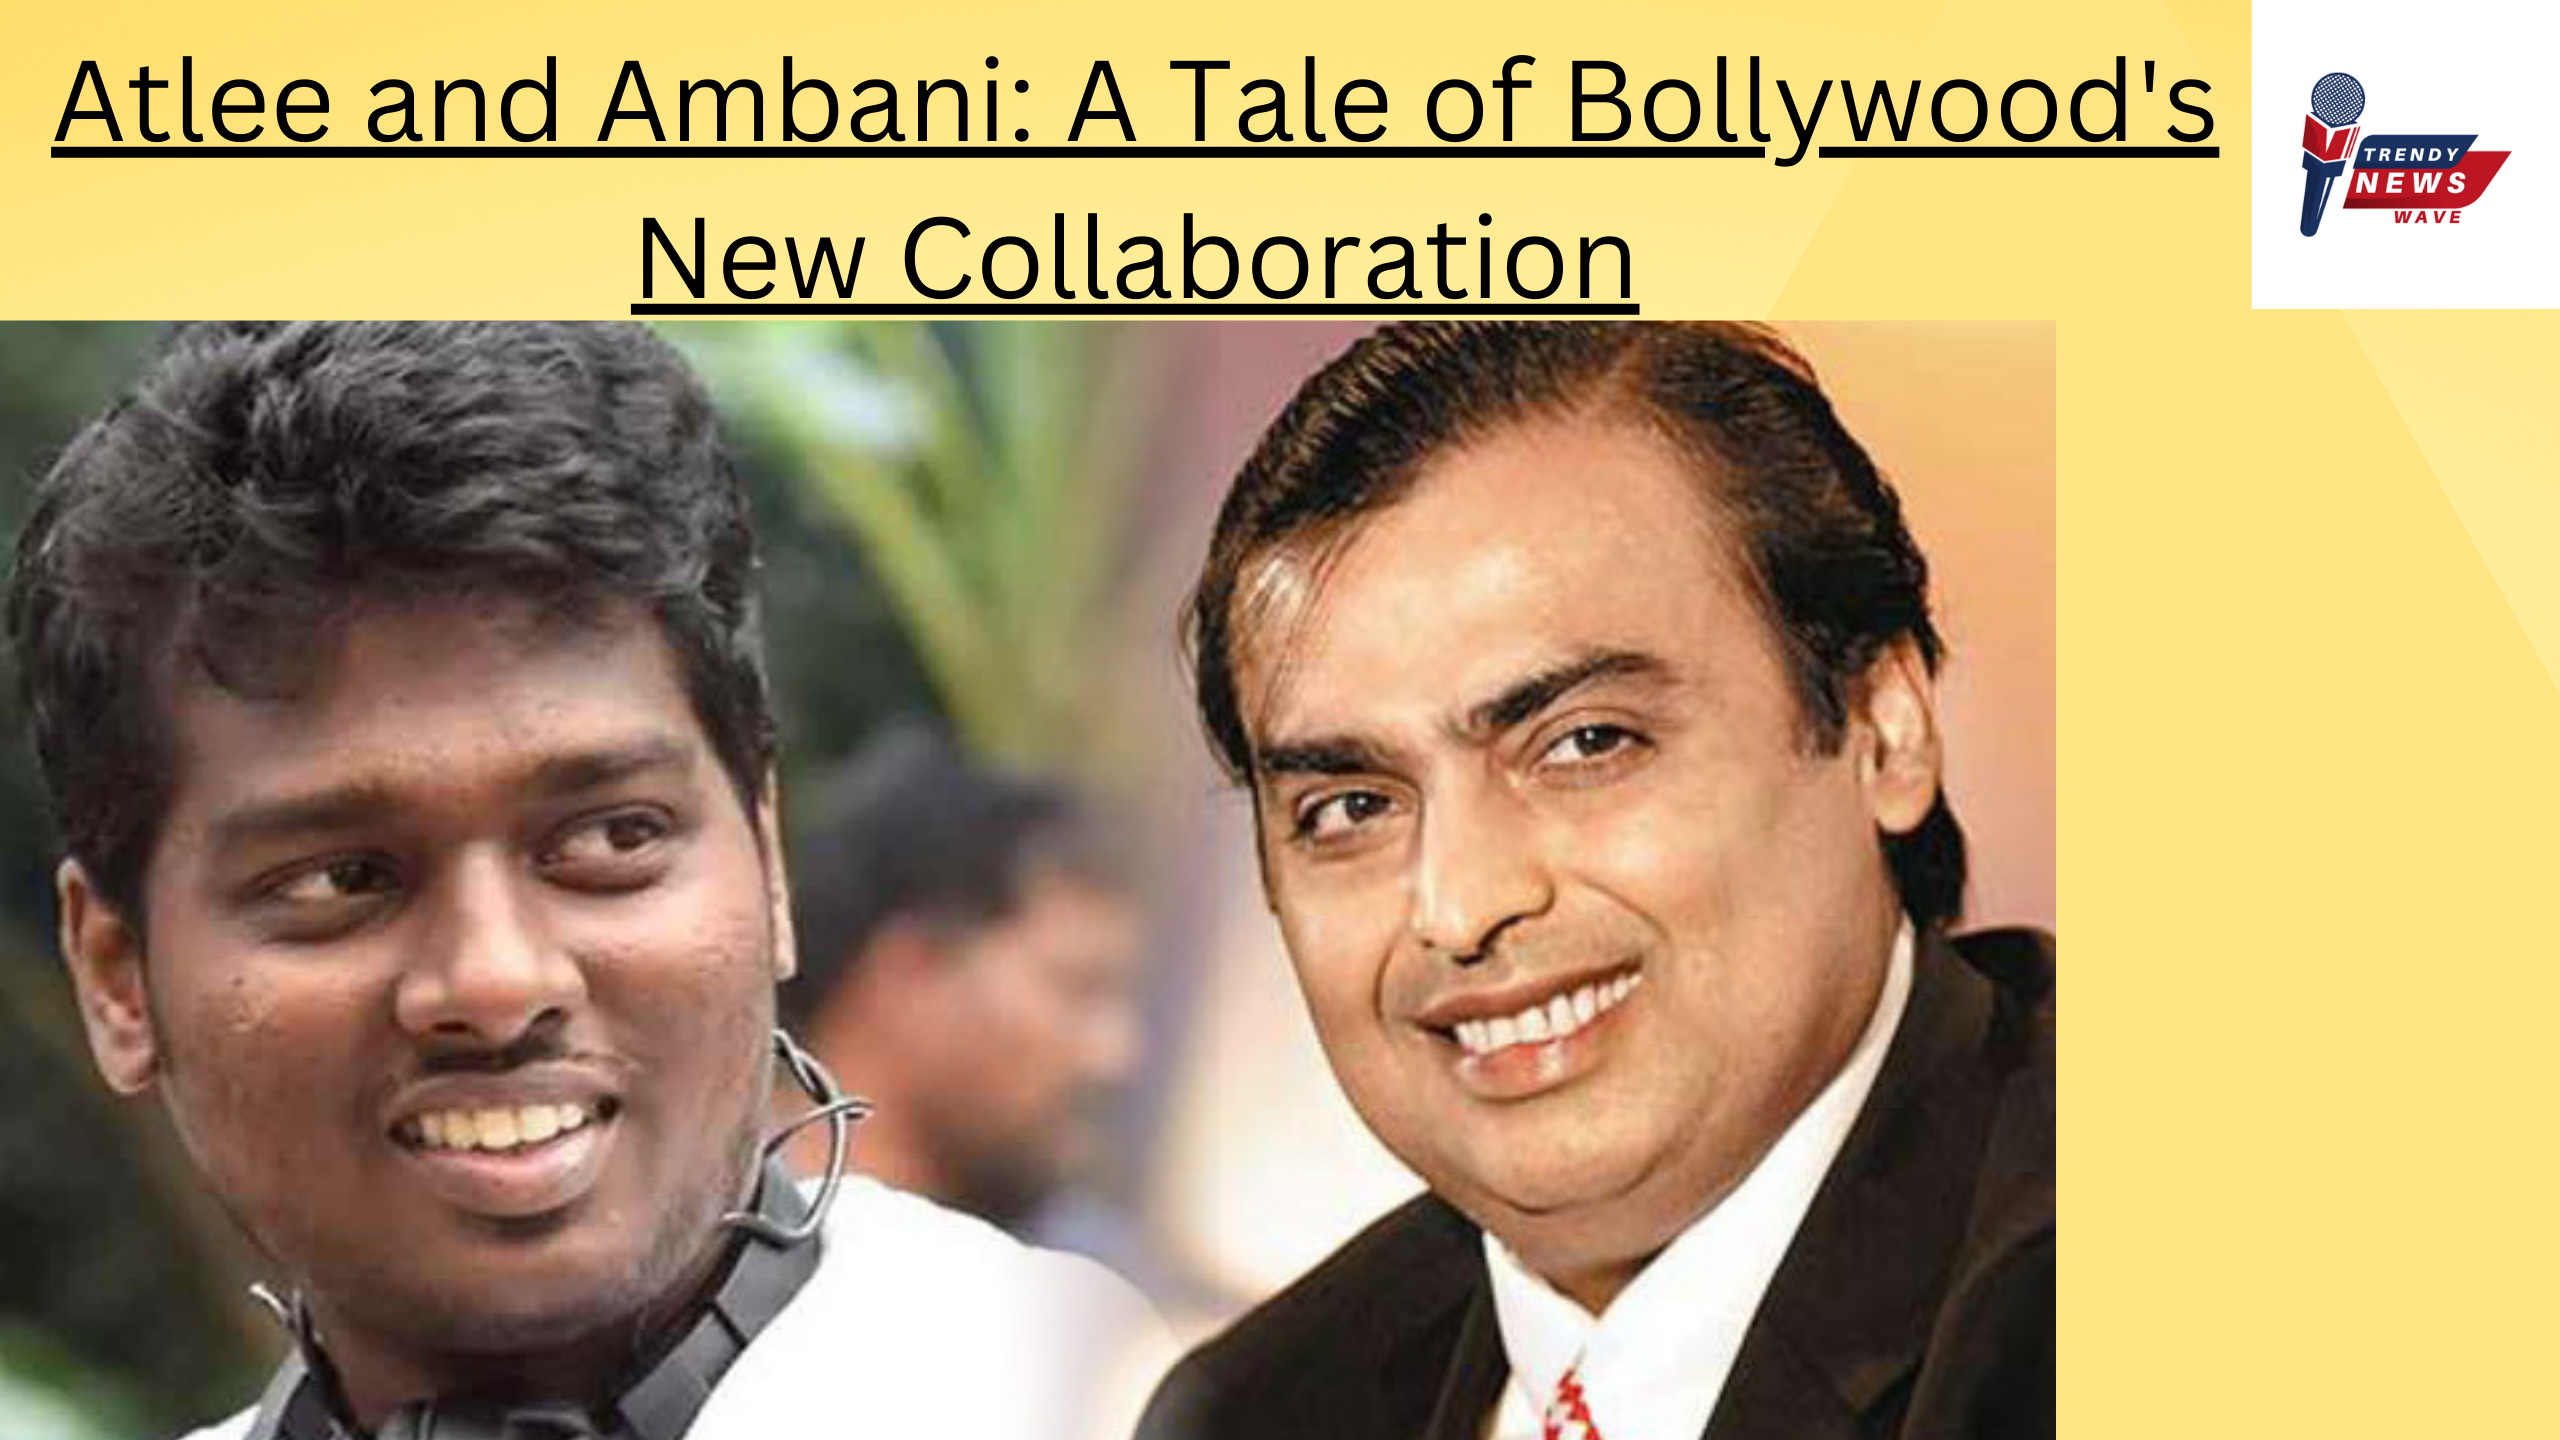 Atlee and Ambani: A Tale of Bollywood's New Collaboration